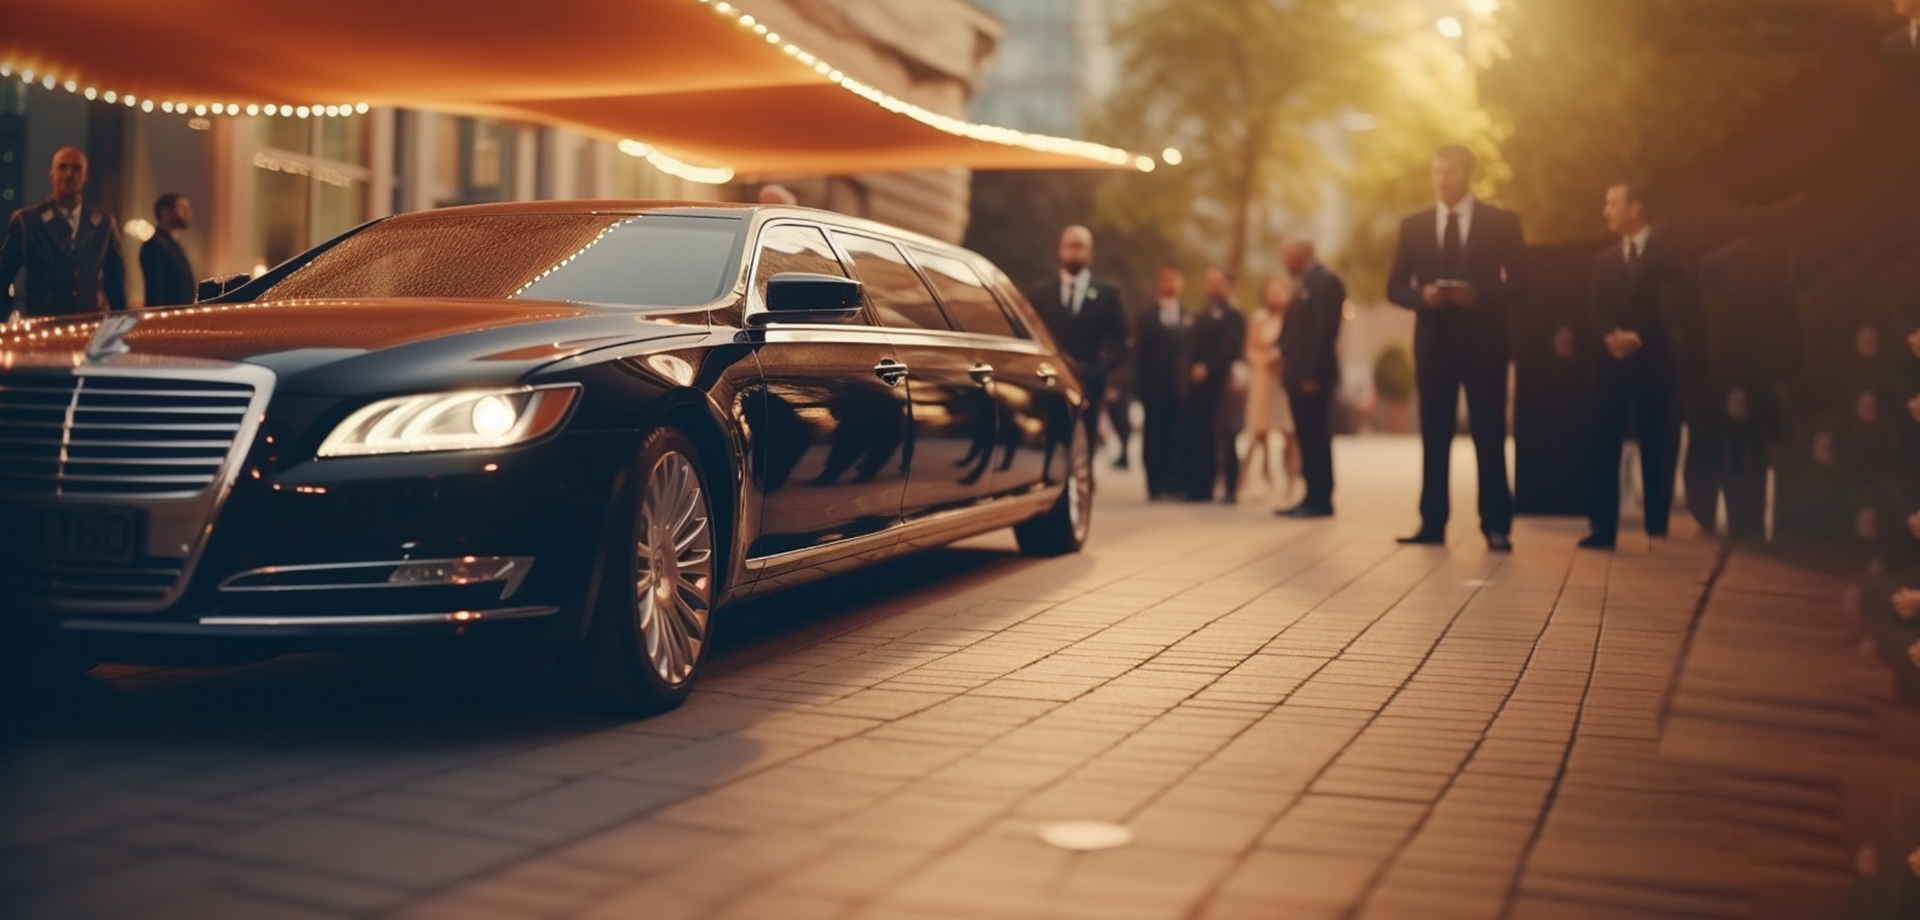 Limo Professional Chauffeurs Book your Limo Tourist Limo , Book Online Limo , Limo Services , Luxurious Vehicles , Professional Chauffeurs , Holidays Party , Vacation